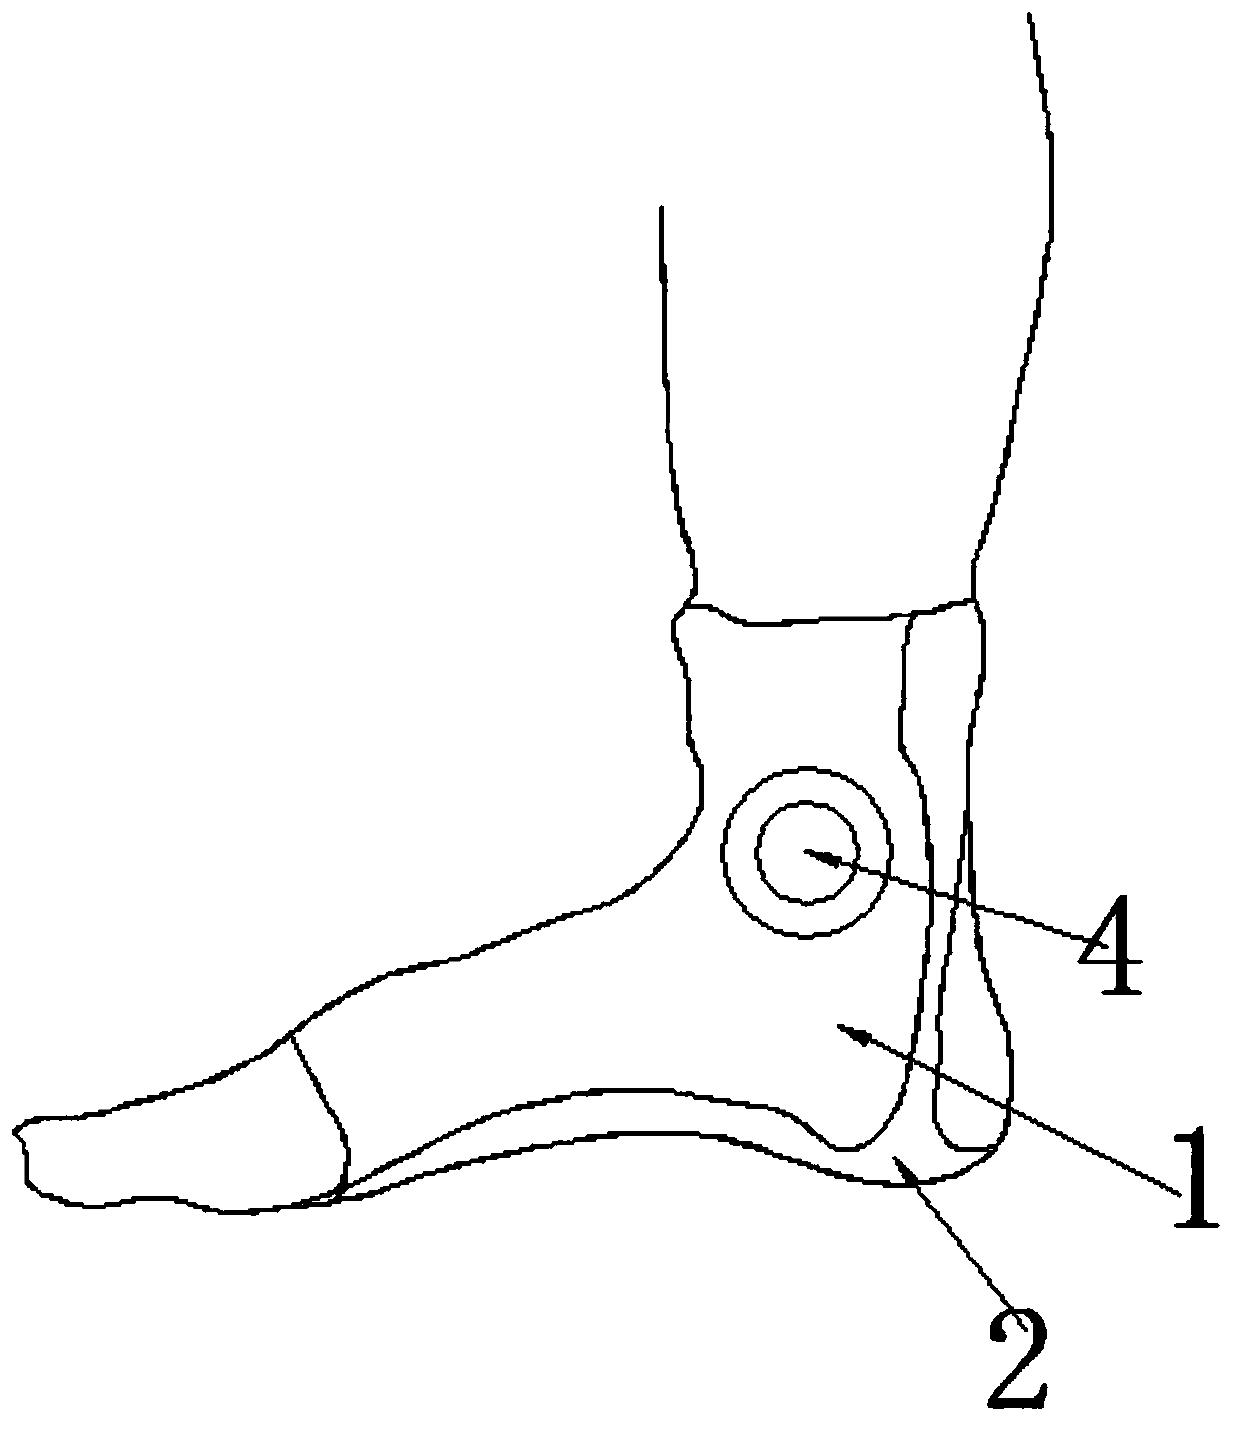 Protective device for foot ankle joint ligament